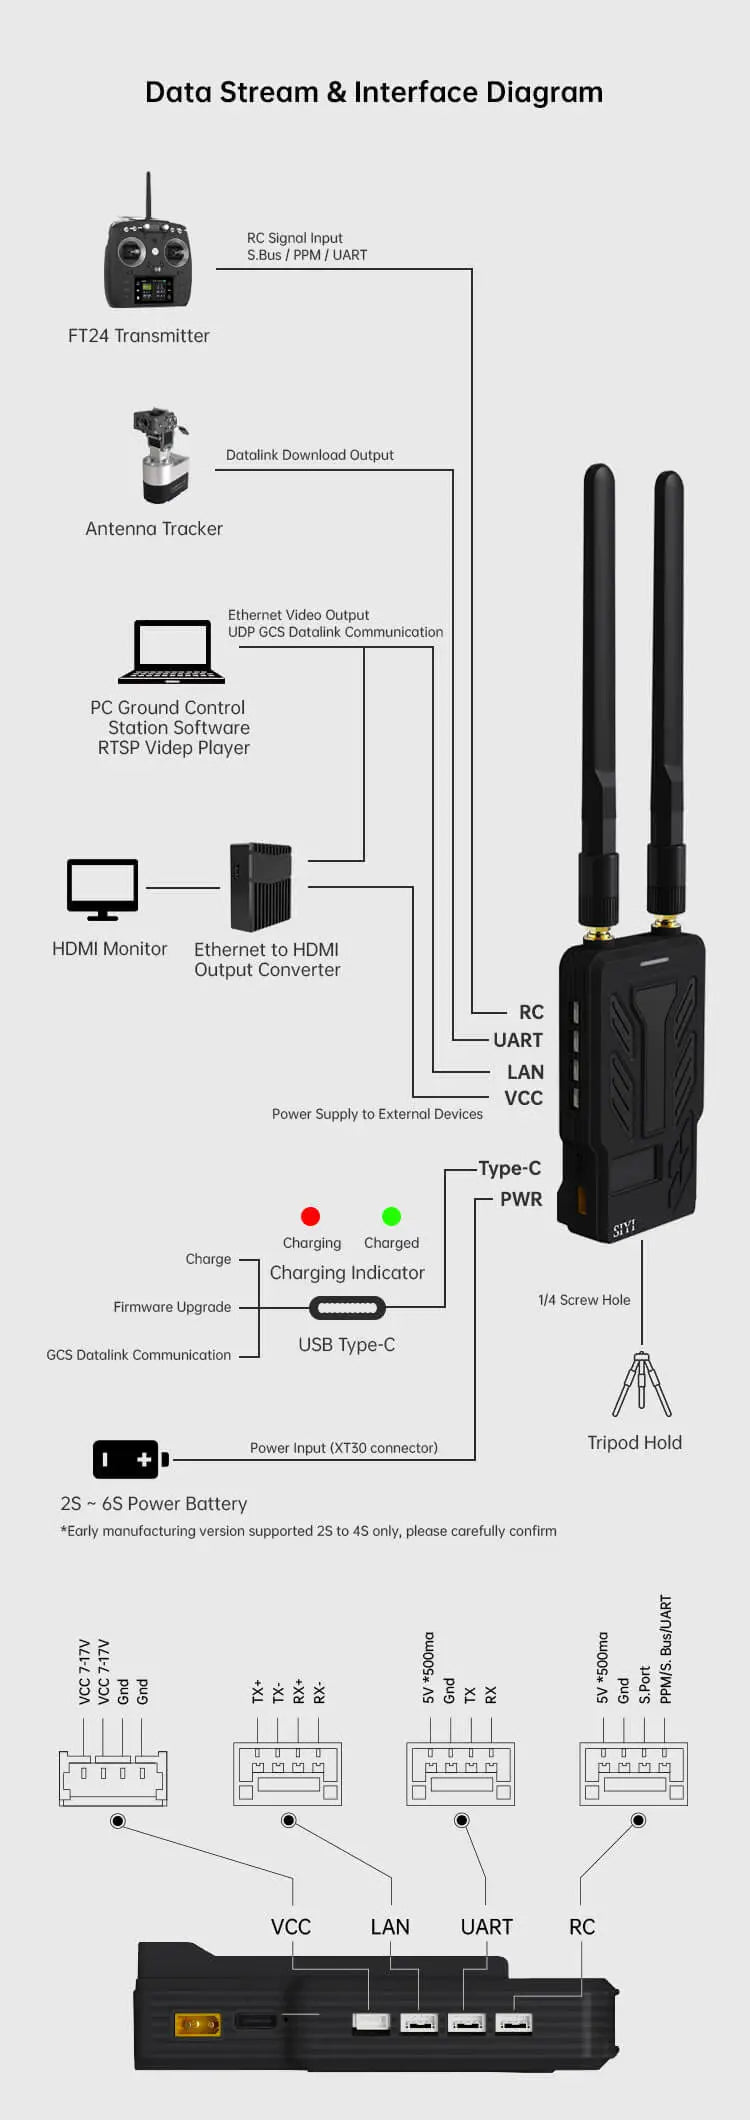 Long-range digital image transmission system for transmitting high-definition video up to 30km with low latency.